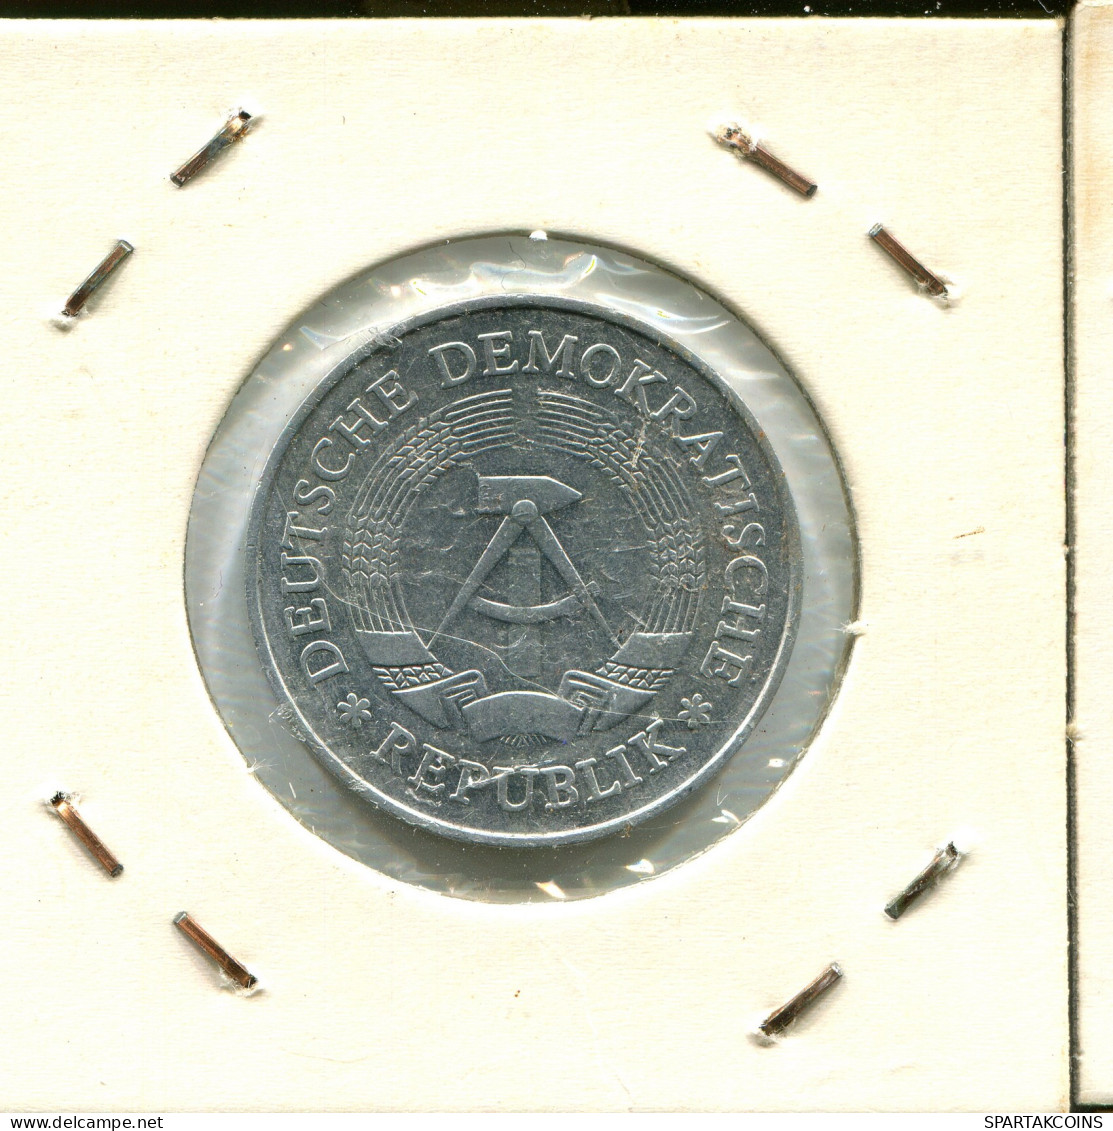 1 MARK 1977 A DDR EAST ALLEMAGNE Pièce GERMANY #AW513.F - 1 Mark